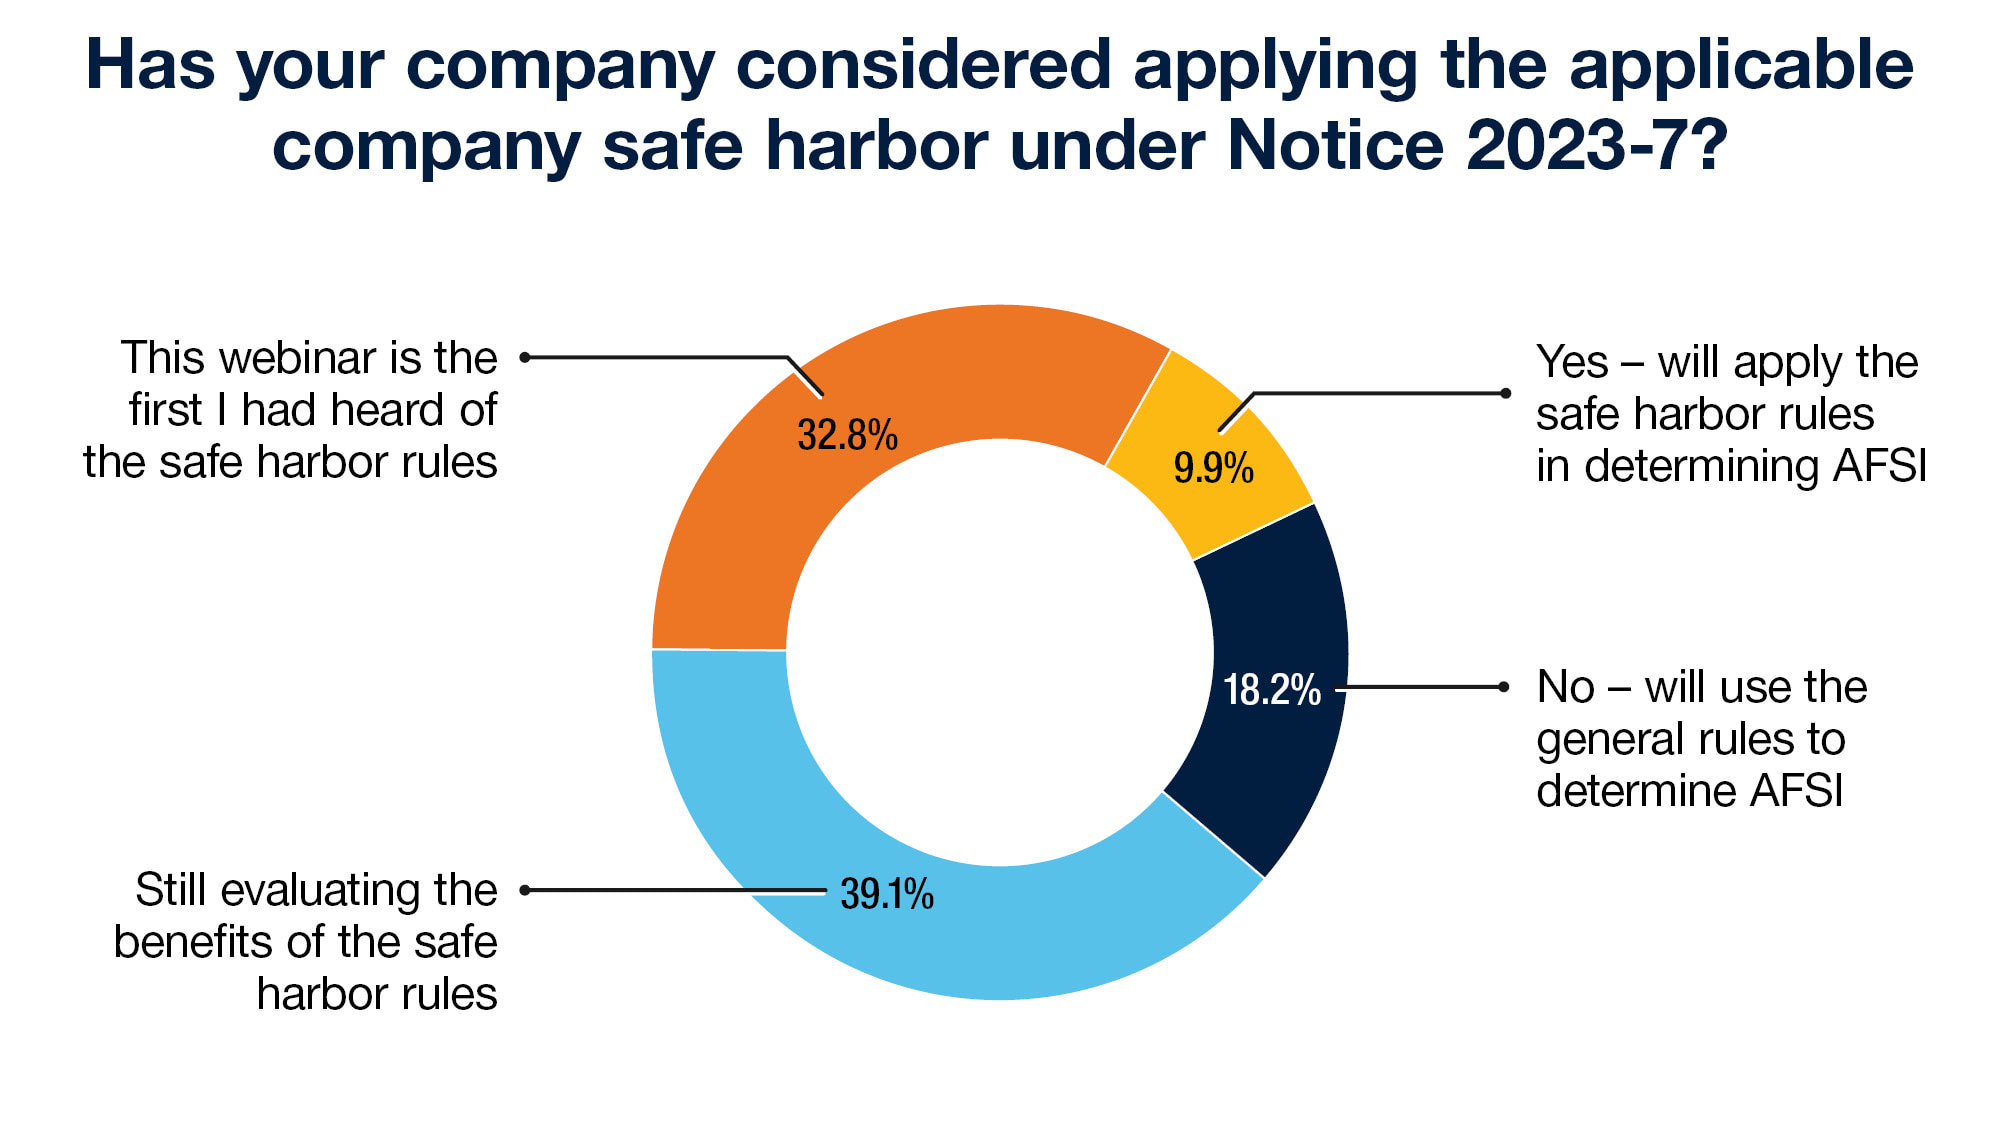 Has your company considered applying the applicable company safe harbor under Notice 2023-7? 